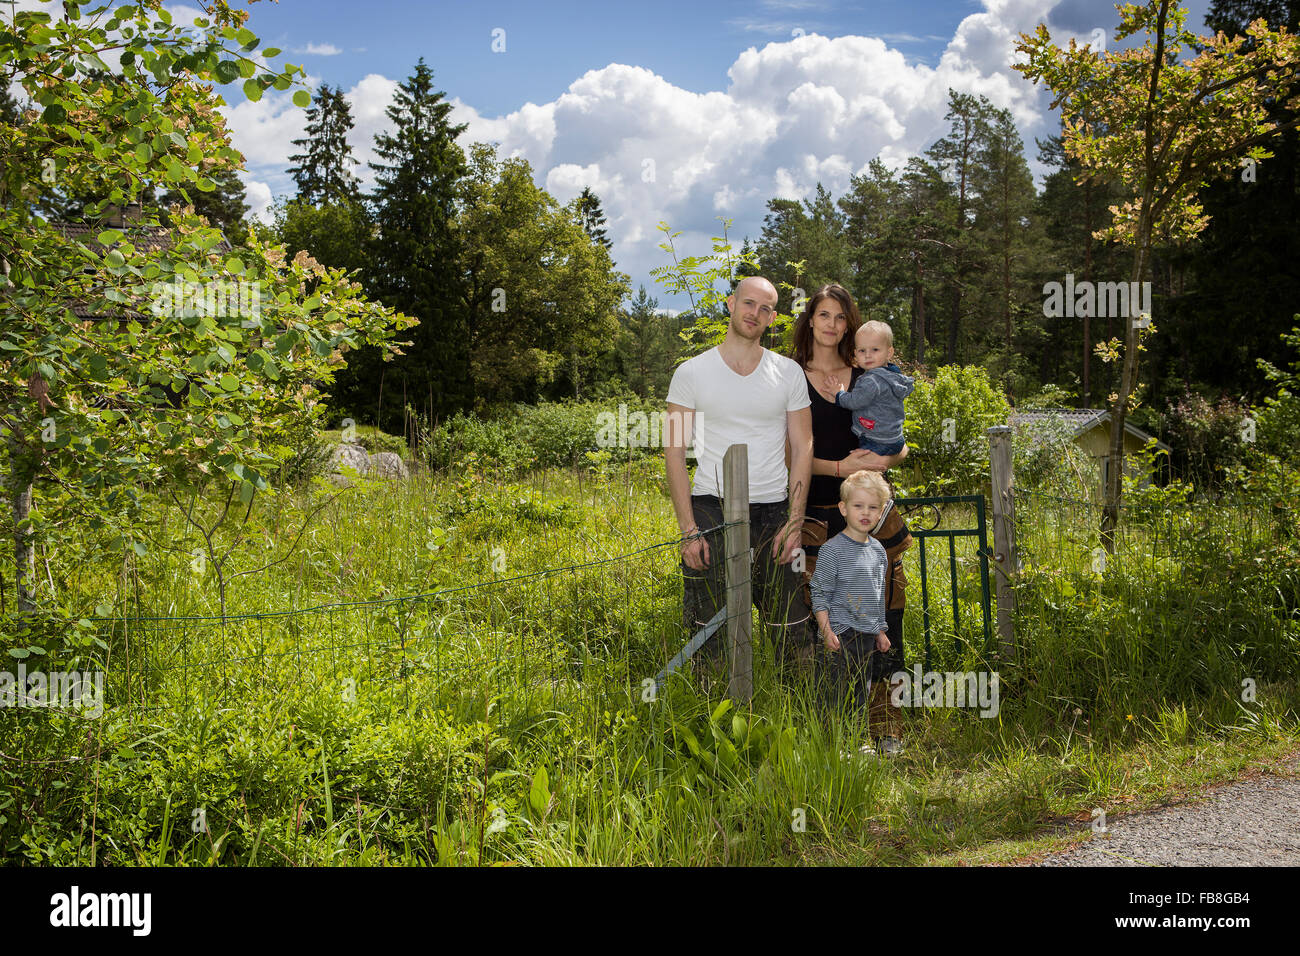 Sweden, Stockholm, Uppland, Nacka, Family with two children (18-23 months, 4-5) standing among lush foliage Stock Photo